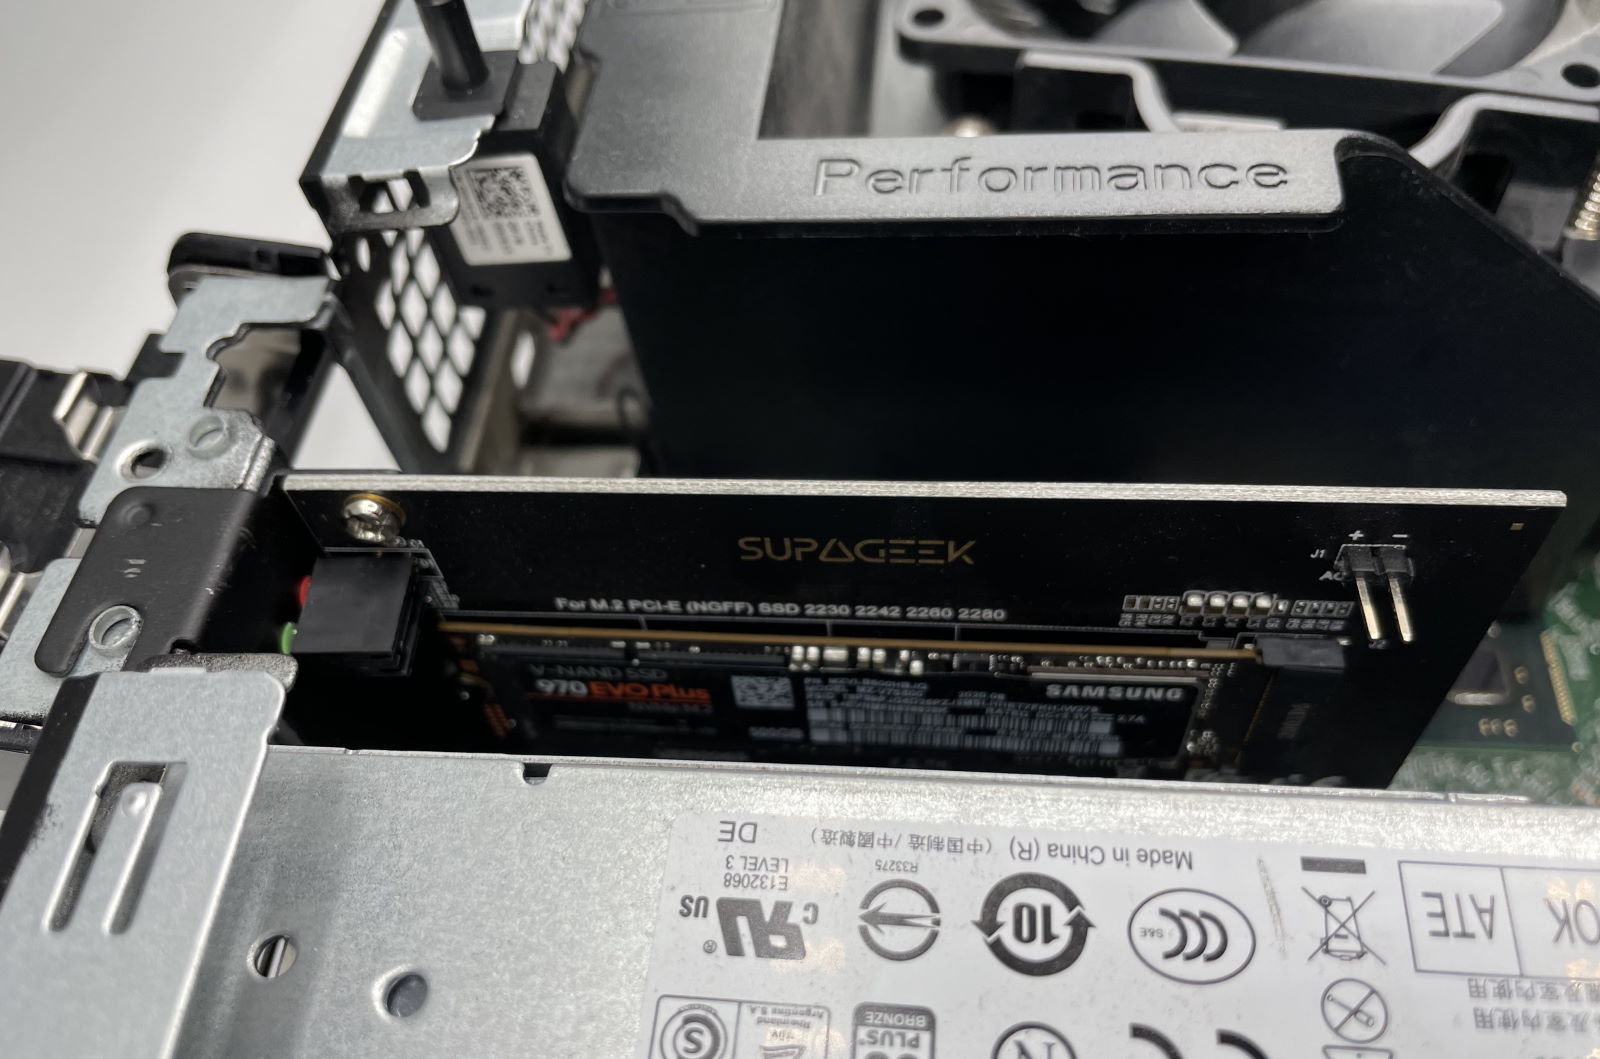 Don't make these mistakes with your NVMe SSD installation - NVMe